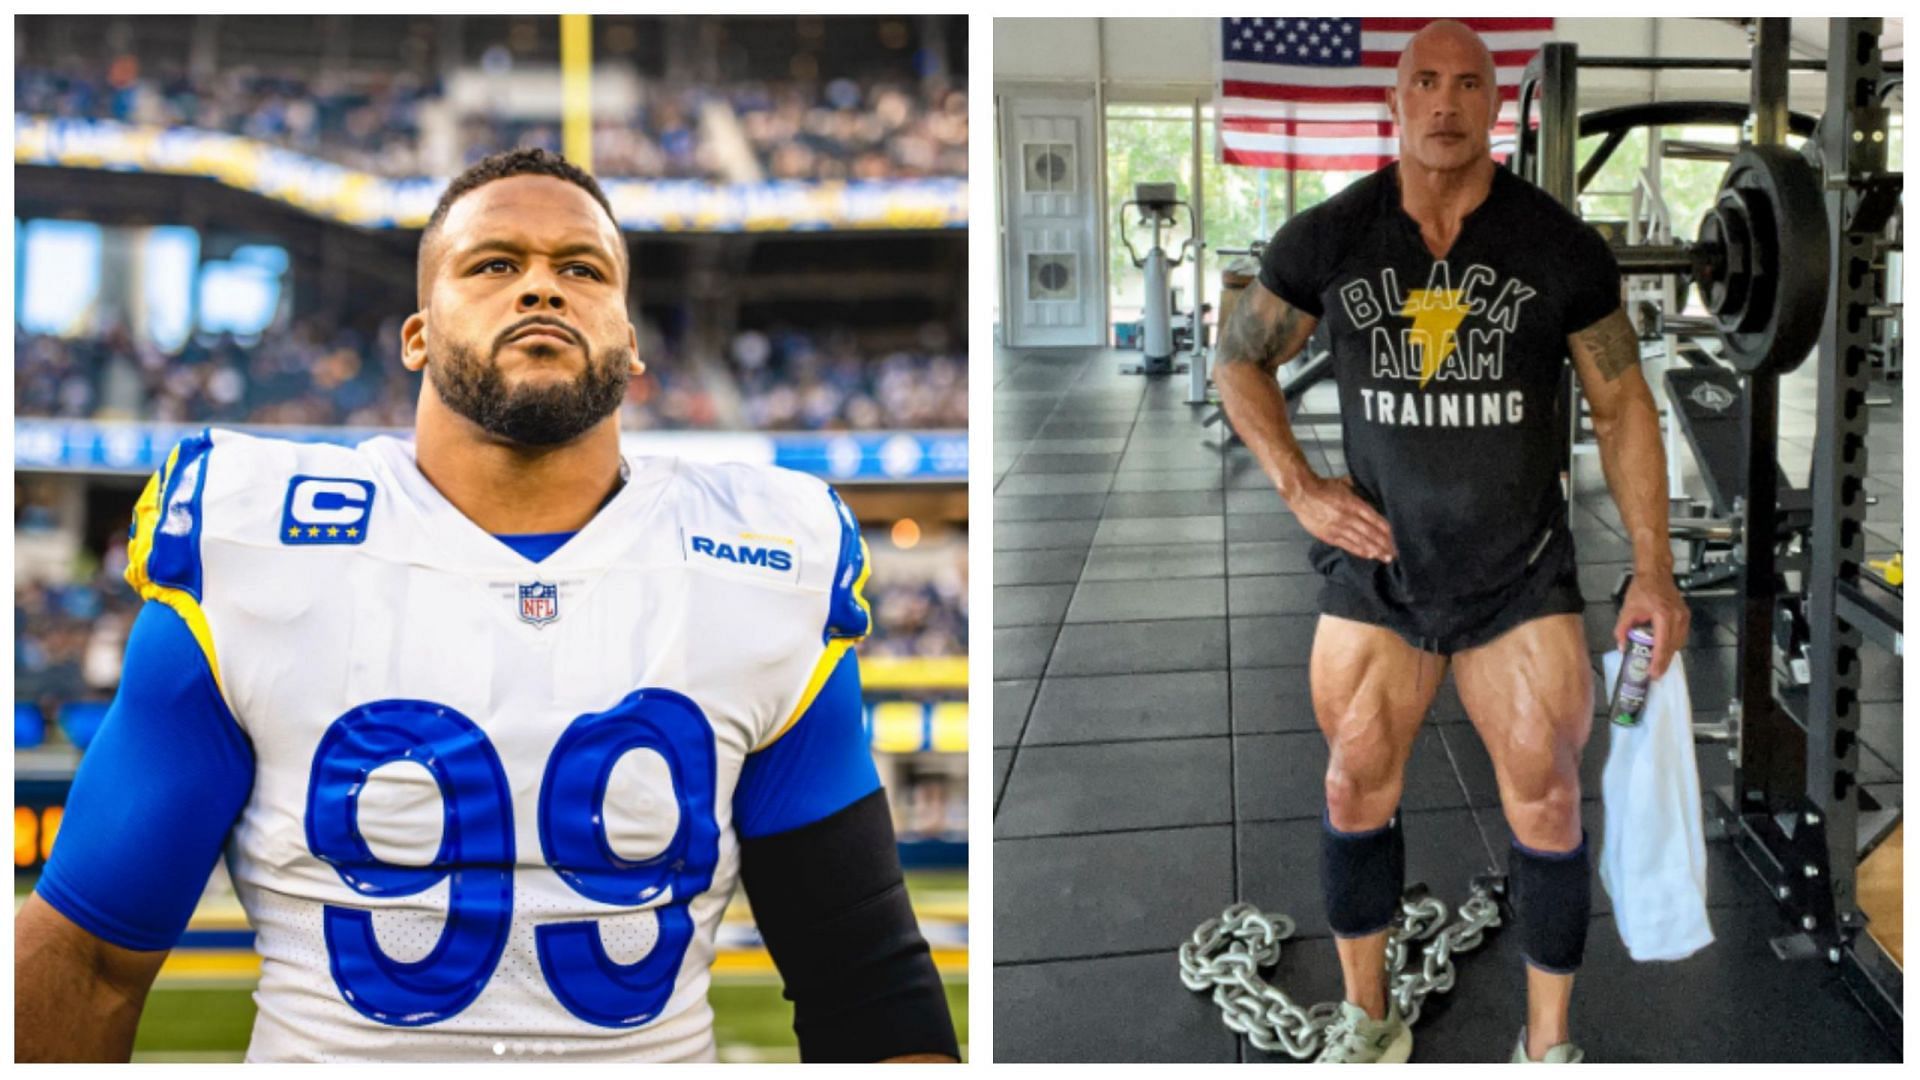 The Rock teams up with Aaron Donald for an ab wheel workout. (Image via Instagram @therock / @aarondonald99)